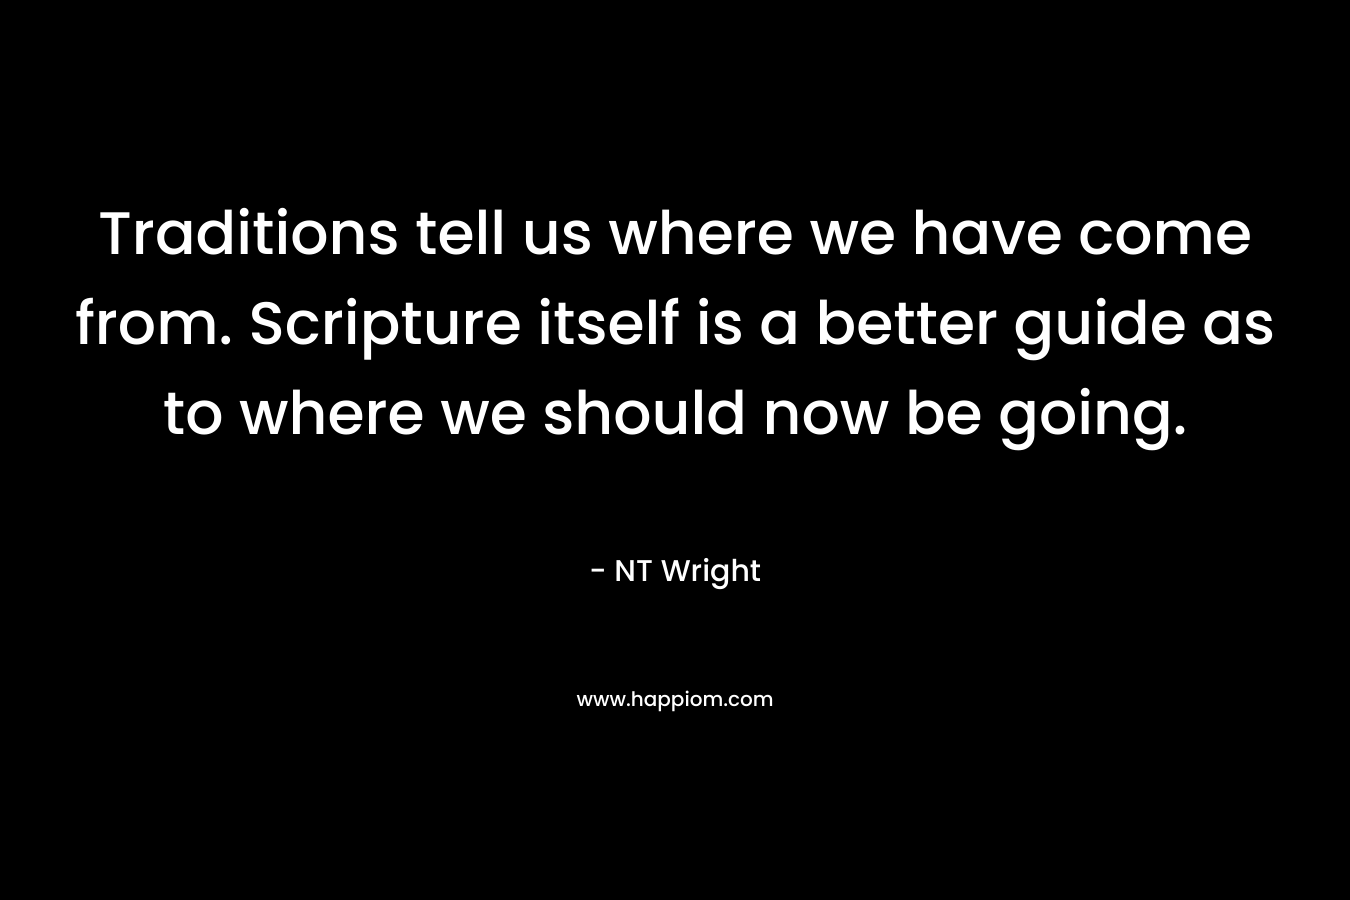 Traditions tell us where we have come from. Scripture itself is a better guide as to where we should now be going. – NT Wright